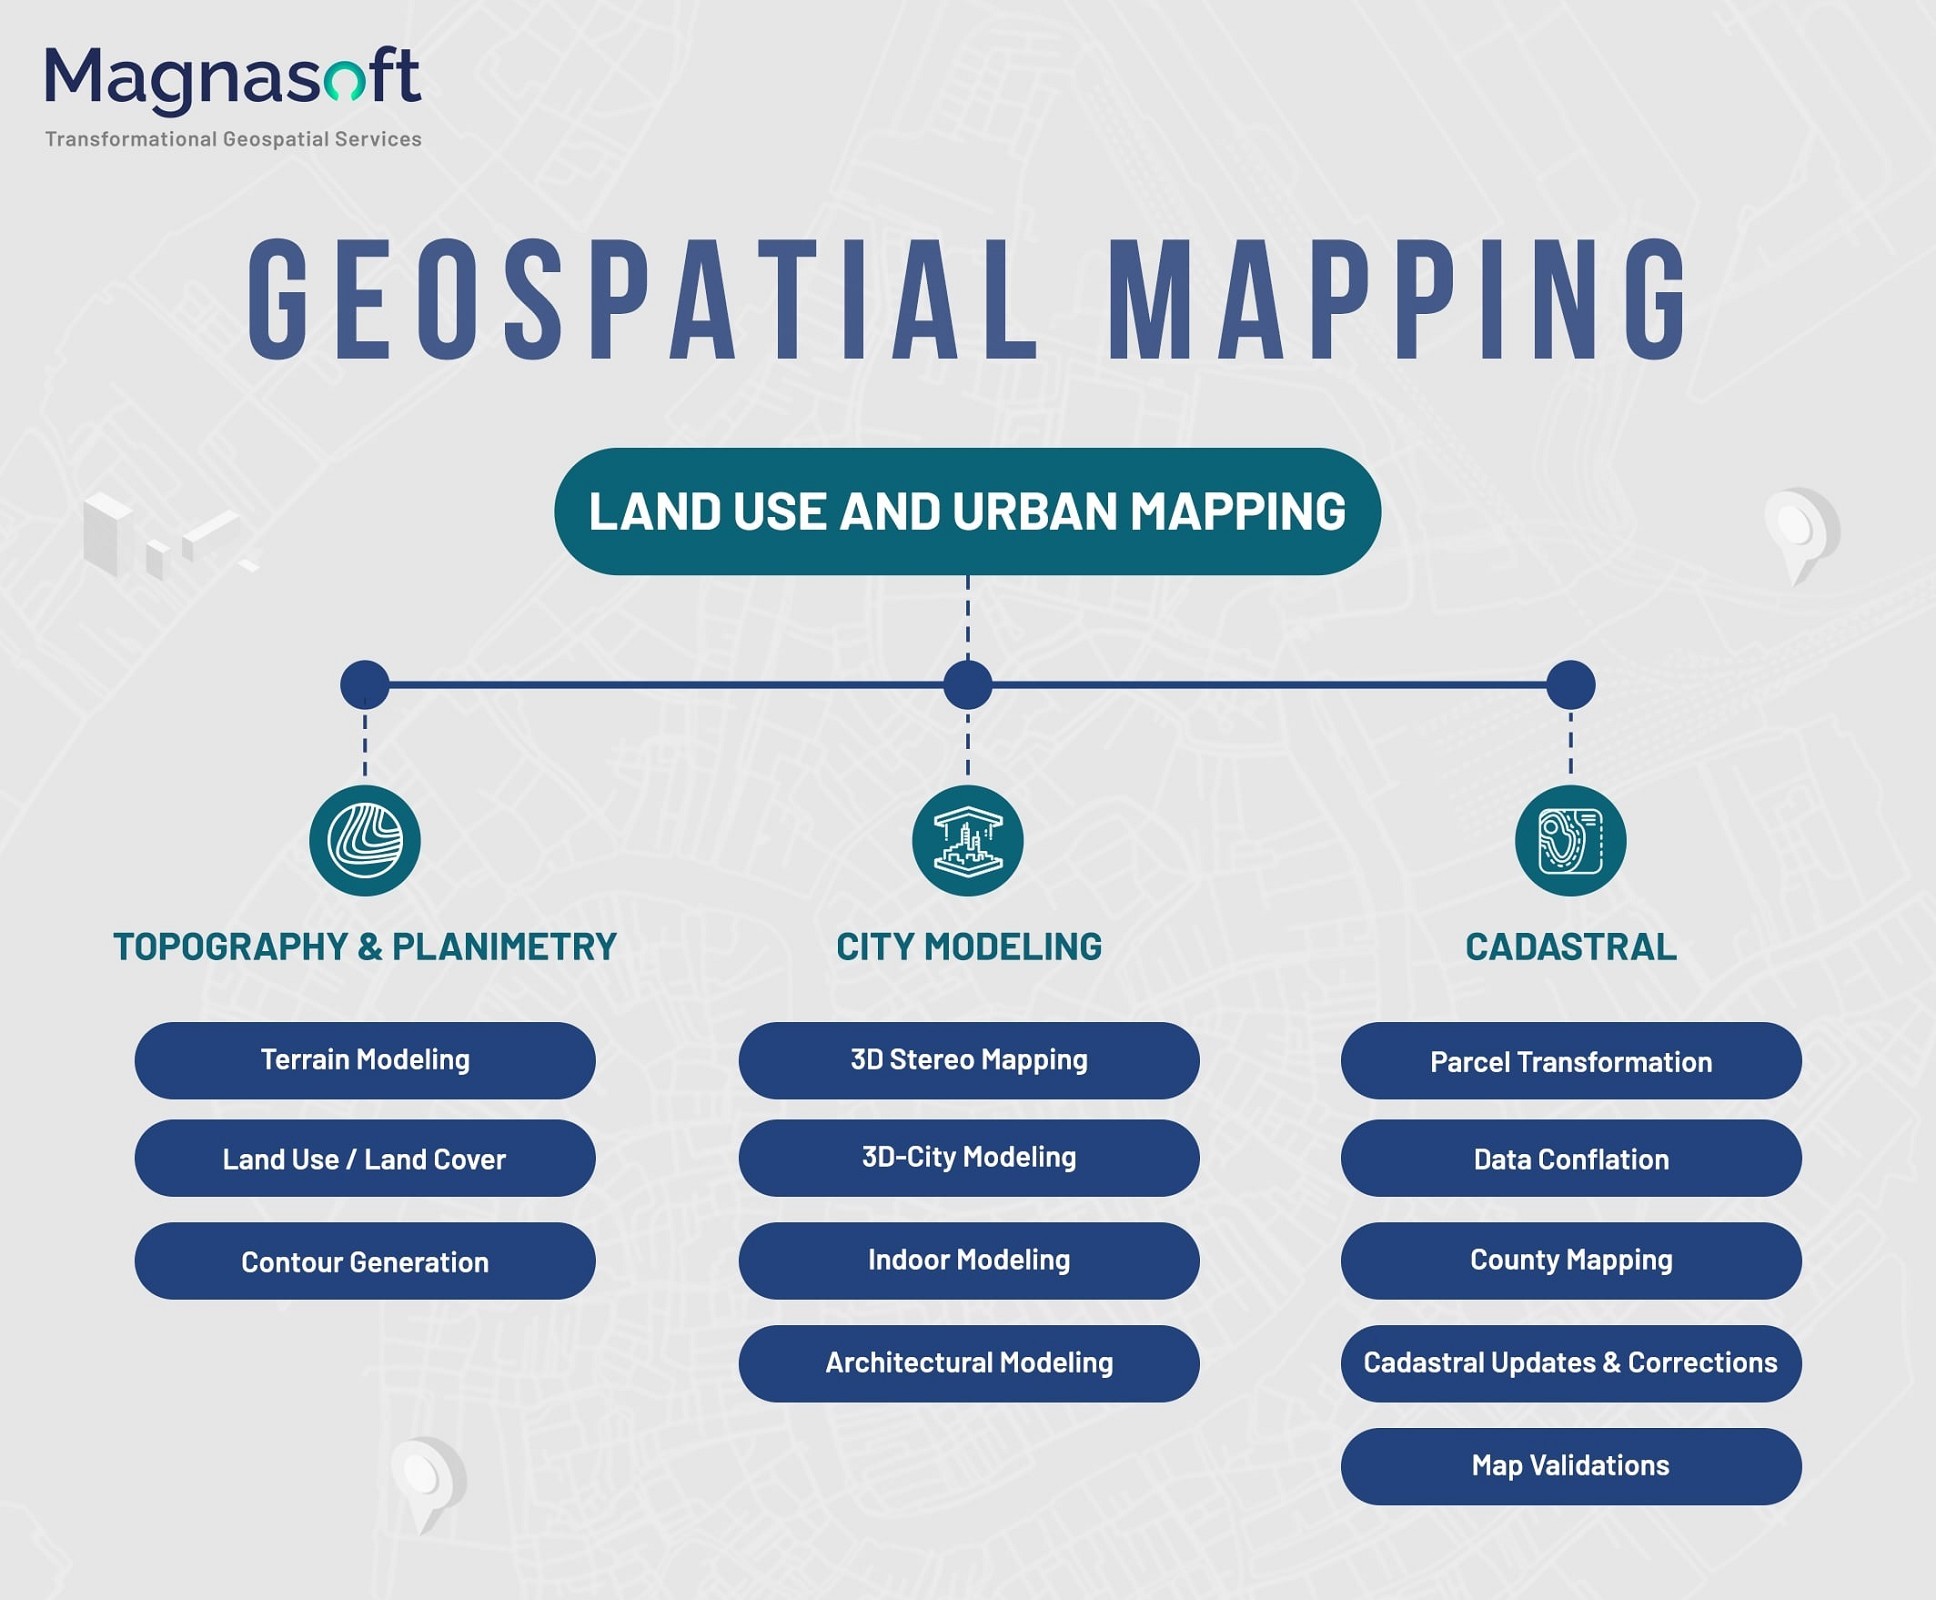 Geospatial Mapping: Land Use and Urban Mapping